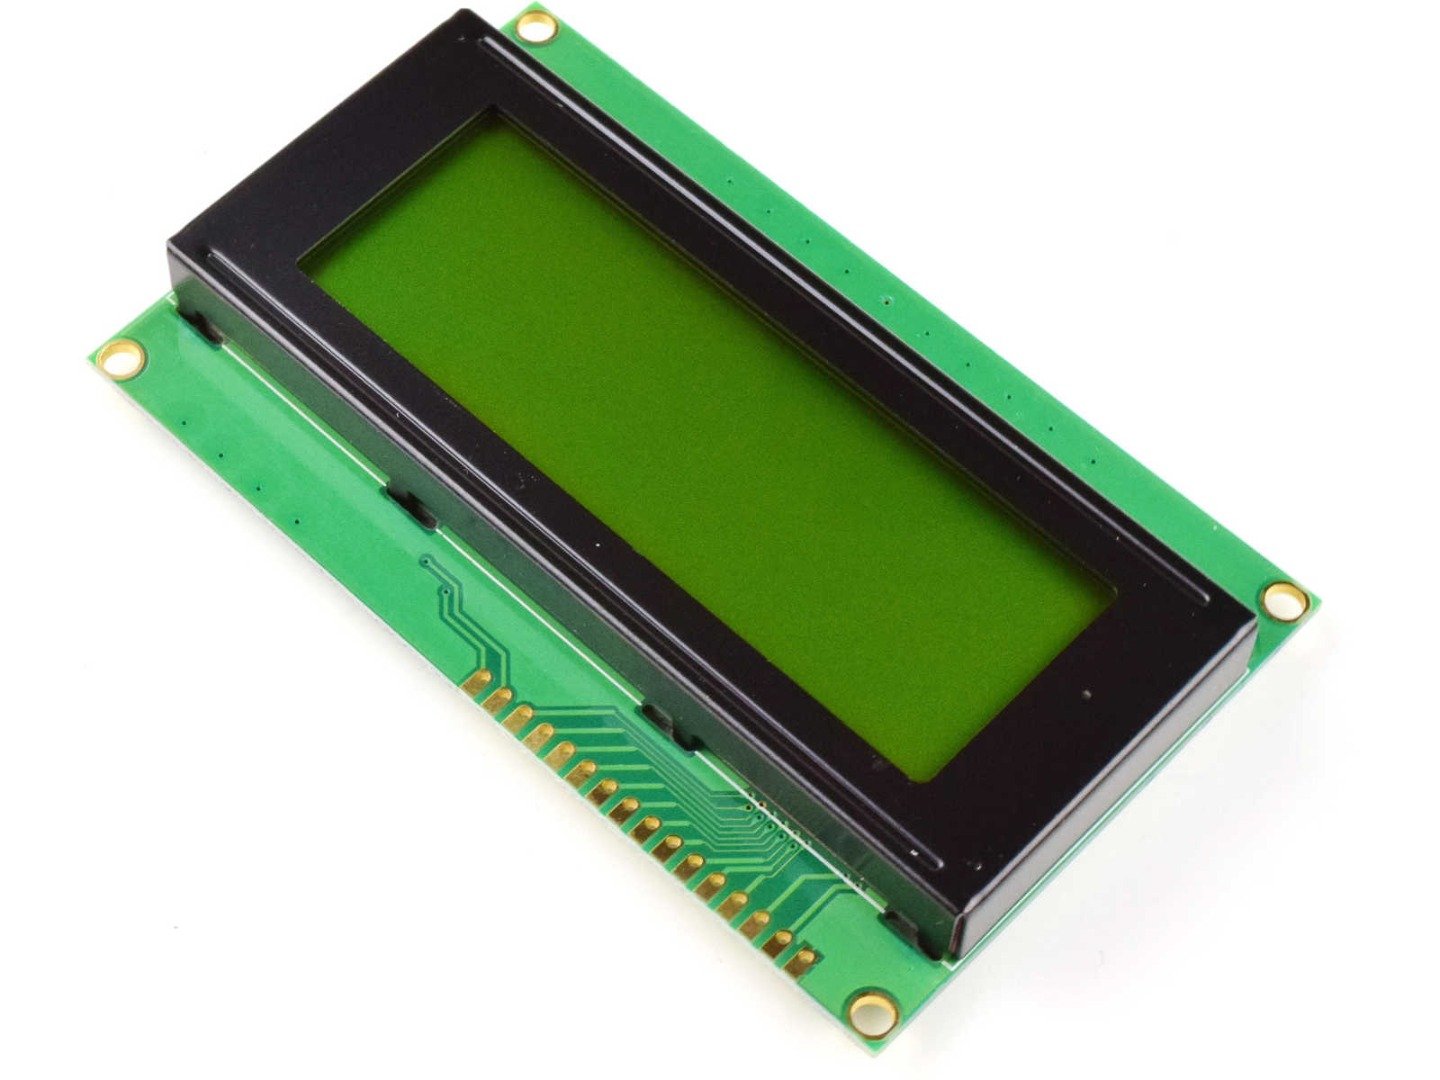 LCD 2004 20×4 Green, Yellow Backlight, parallel or I2C serial 8